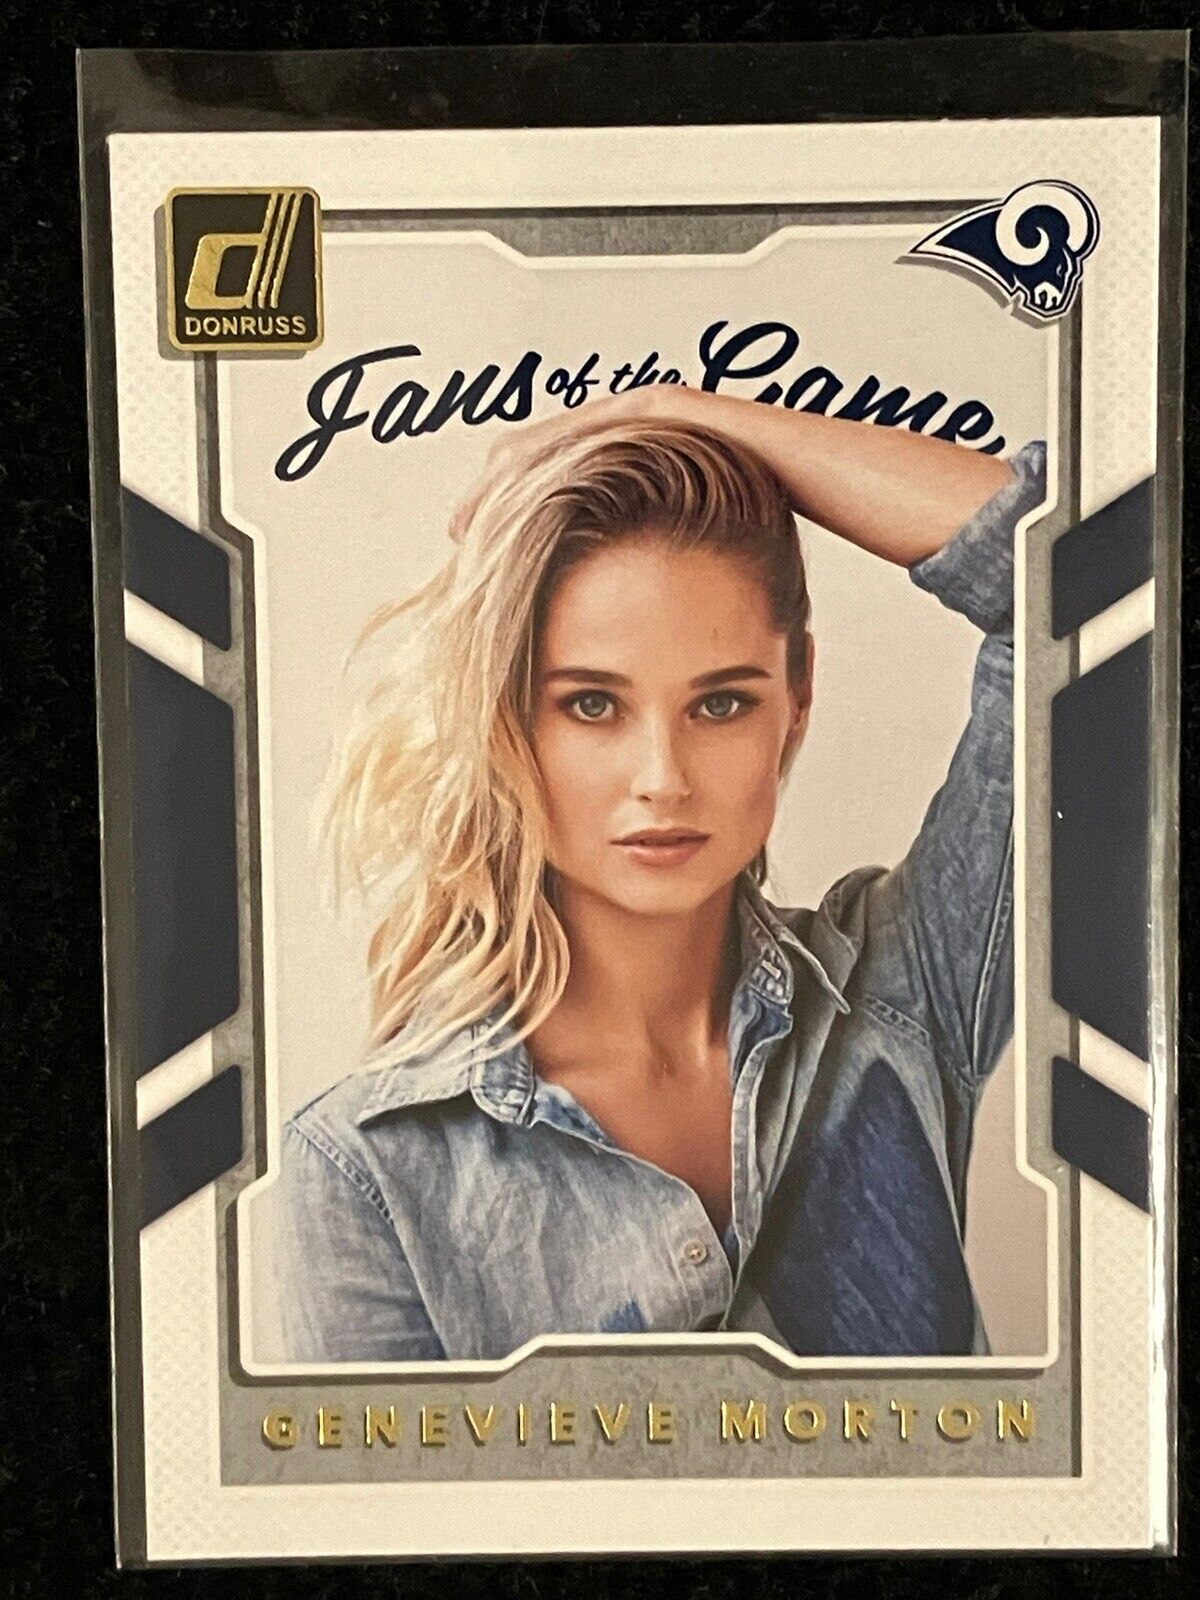 Genevieve Morton 2017 Donruss Fans of The Game Insert Card. Los Angeles Rams